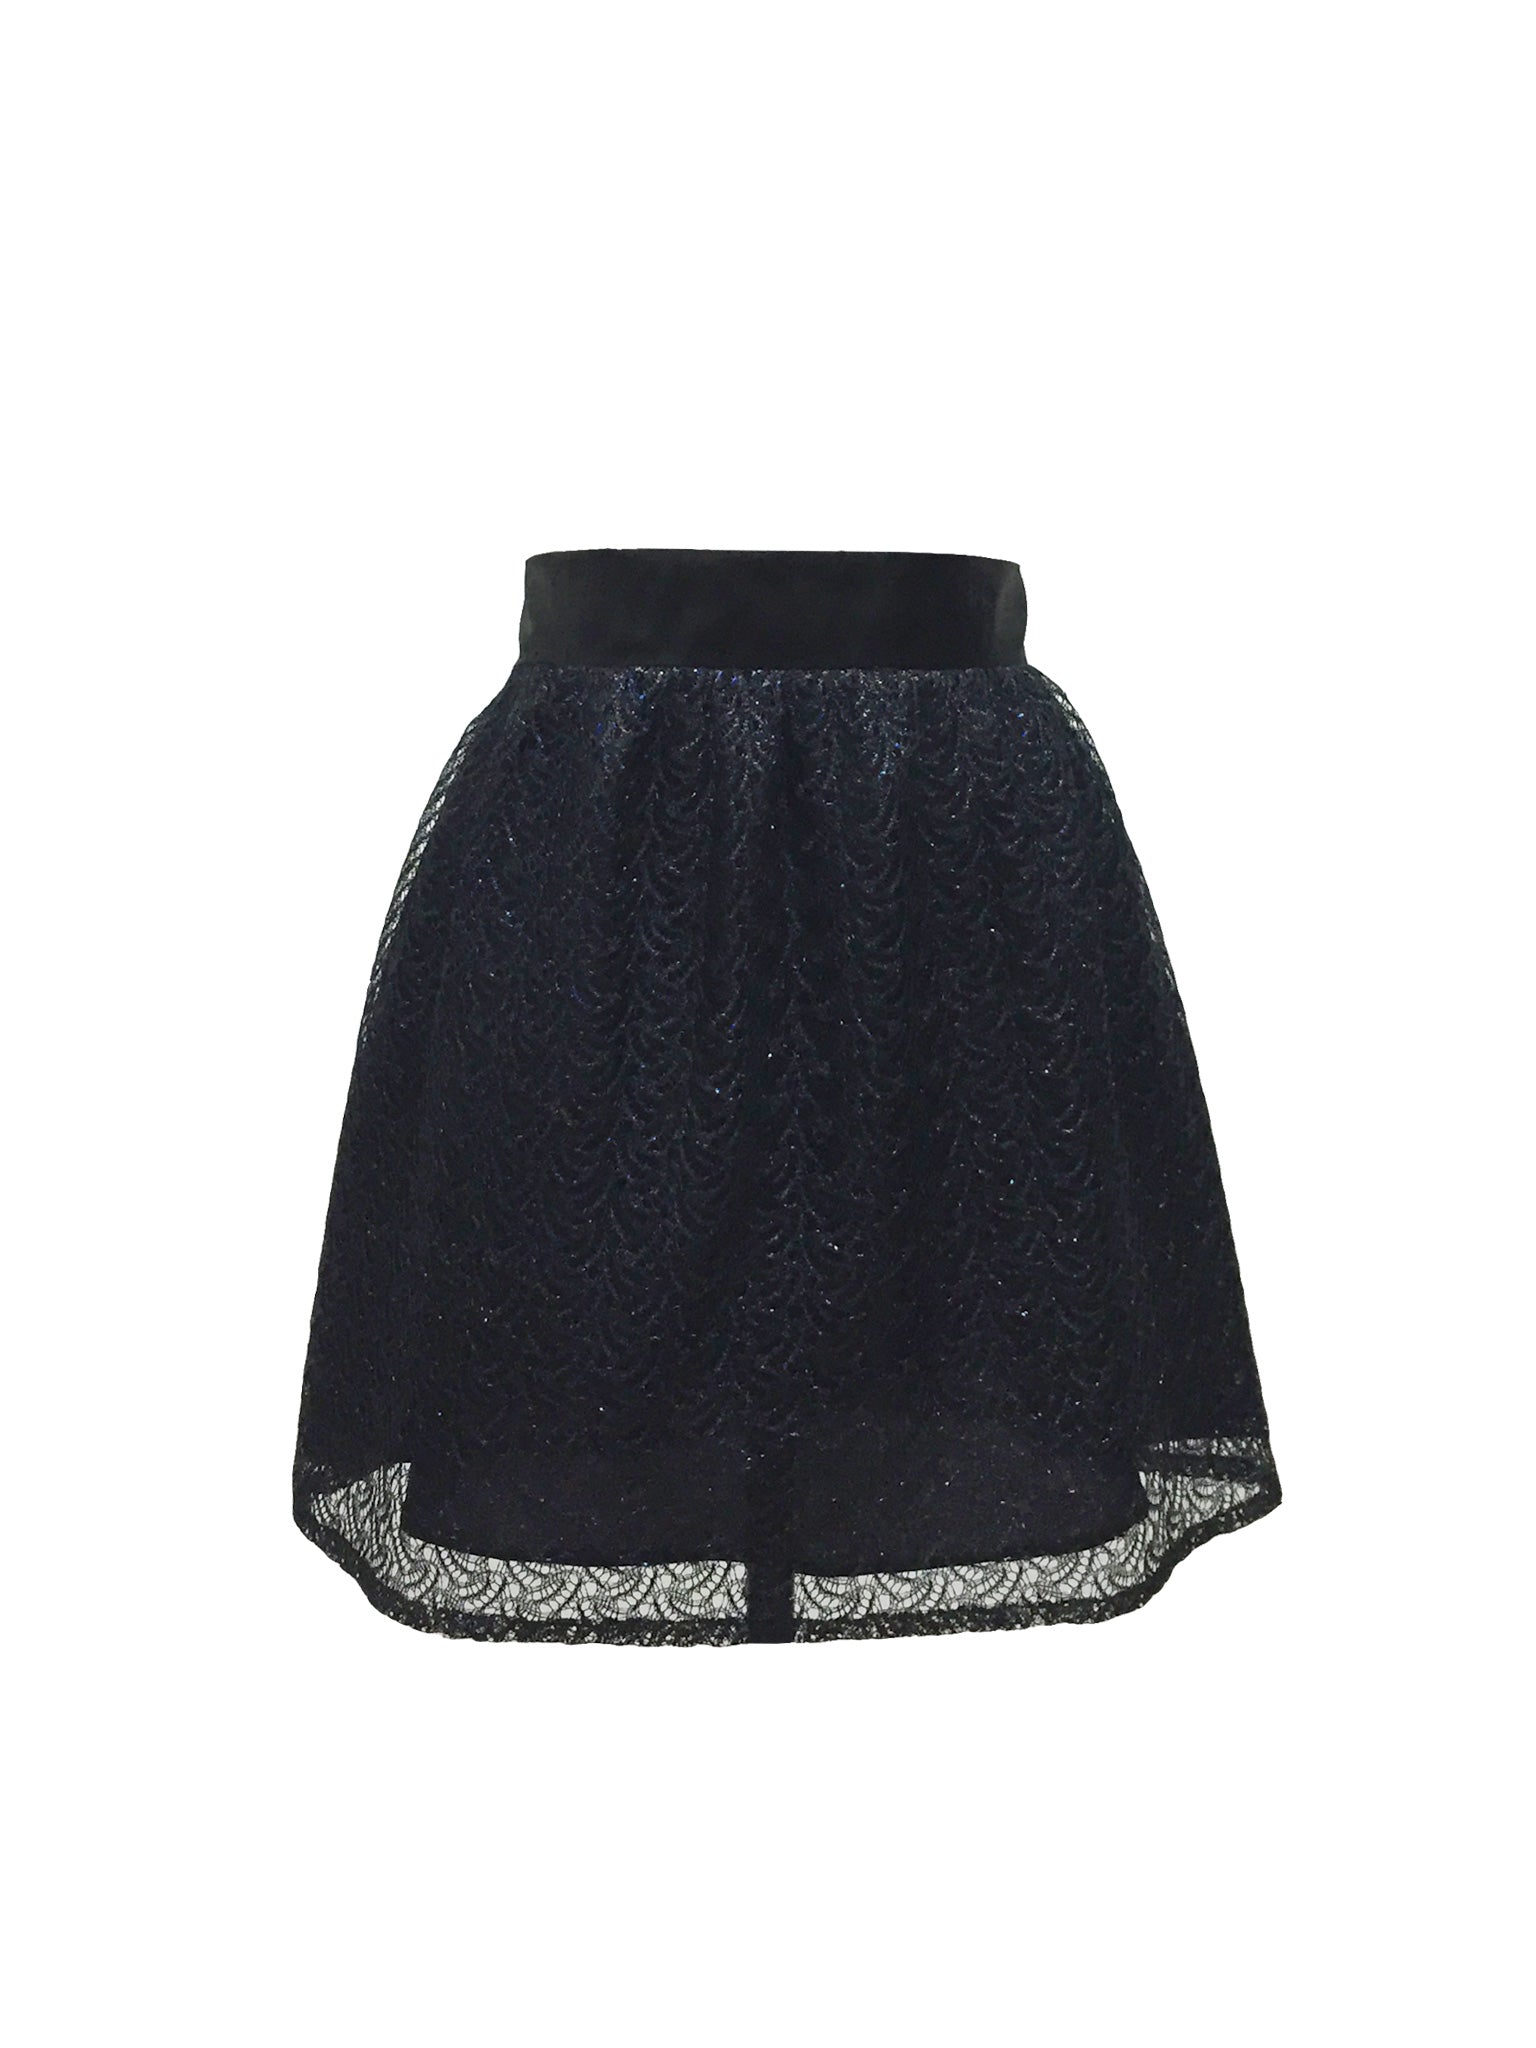 Midnight Lace Party Skirt